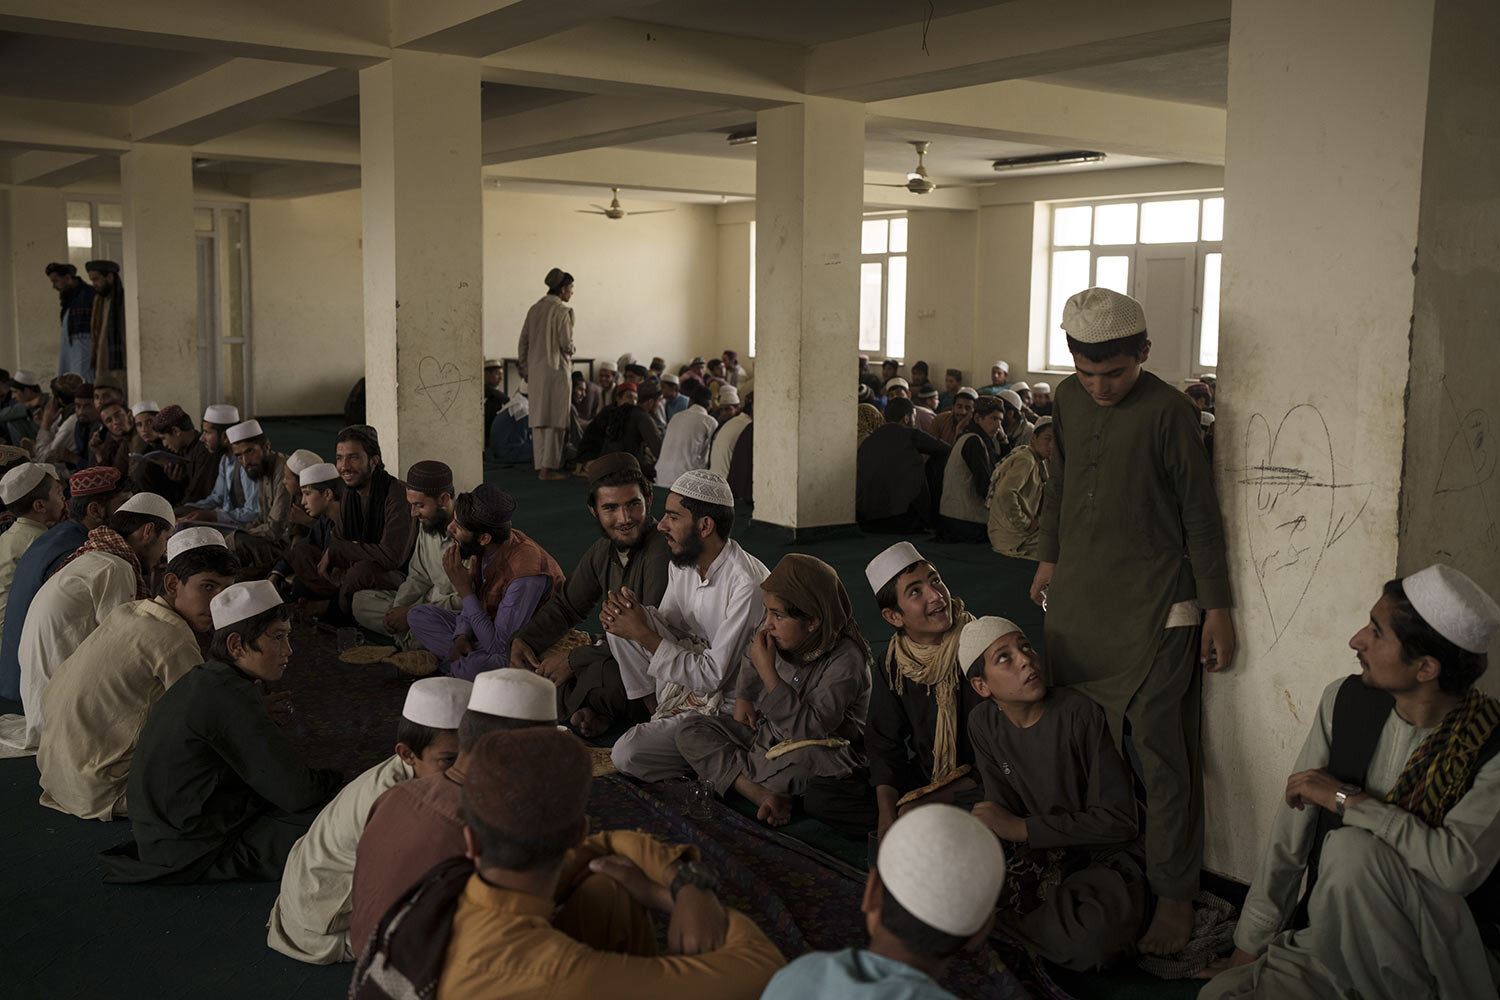 Afghan students wait for breakfast to be served at the dining hall of the Khatamul Anbiya madrasa in Kabul, Afghanistan, Wednesday, Sept. 29, 2021. (AP Photo/Felipe Dana)